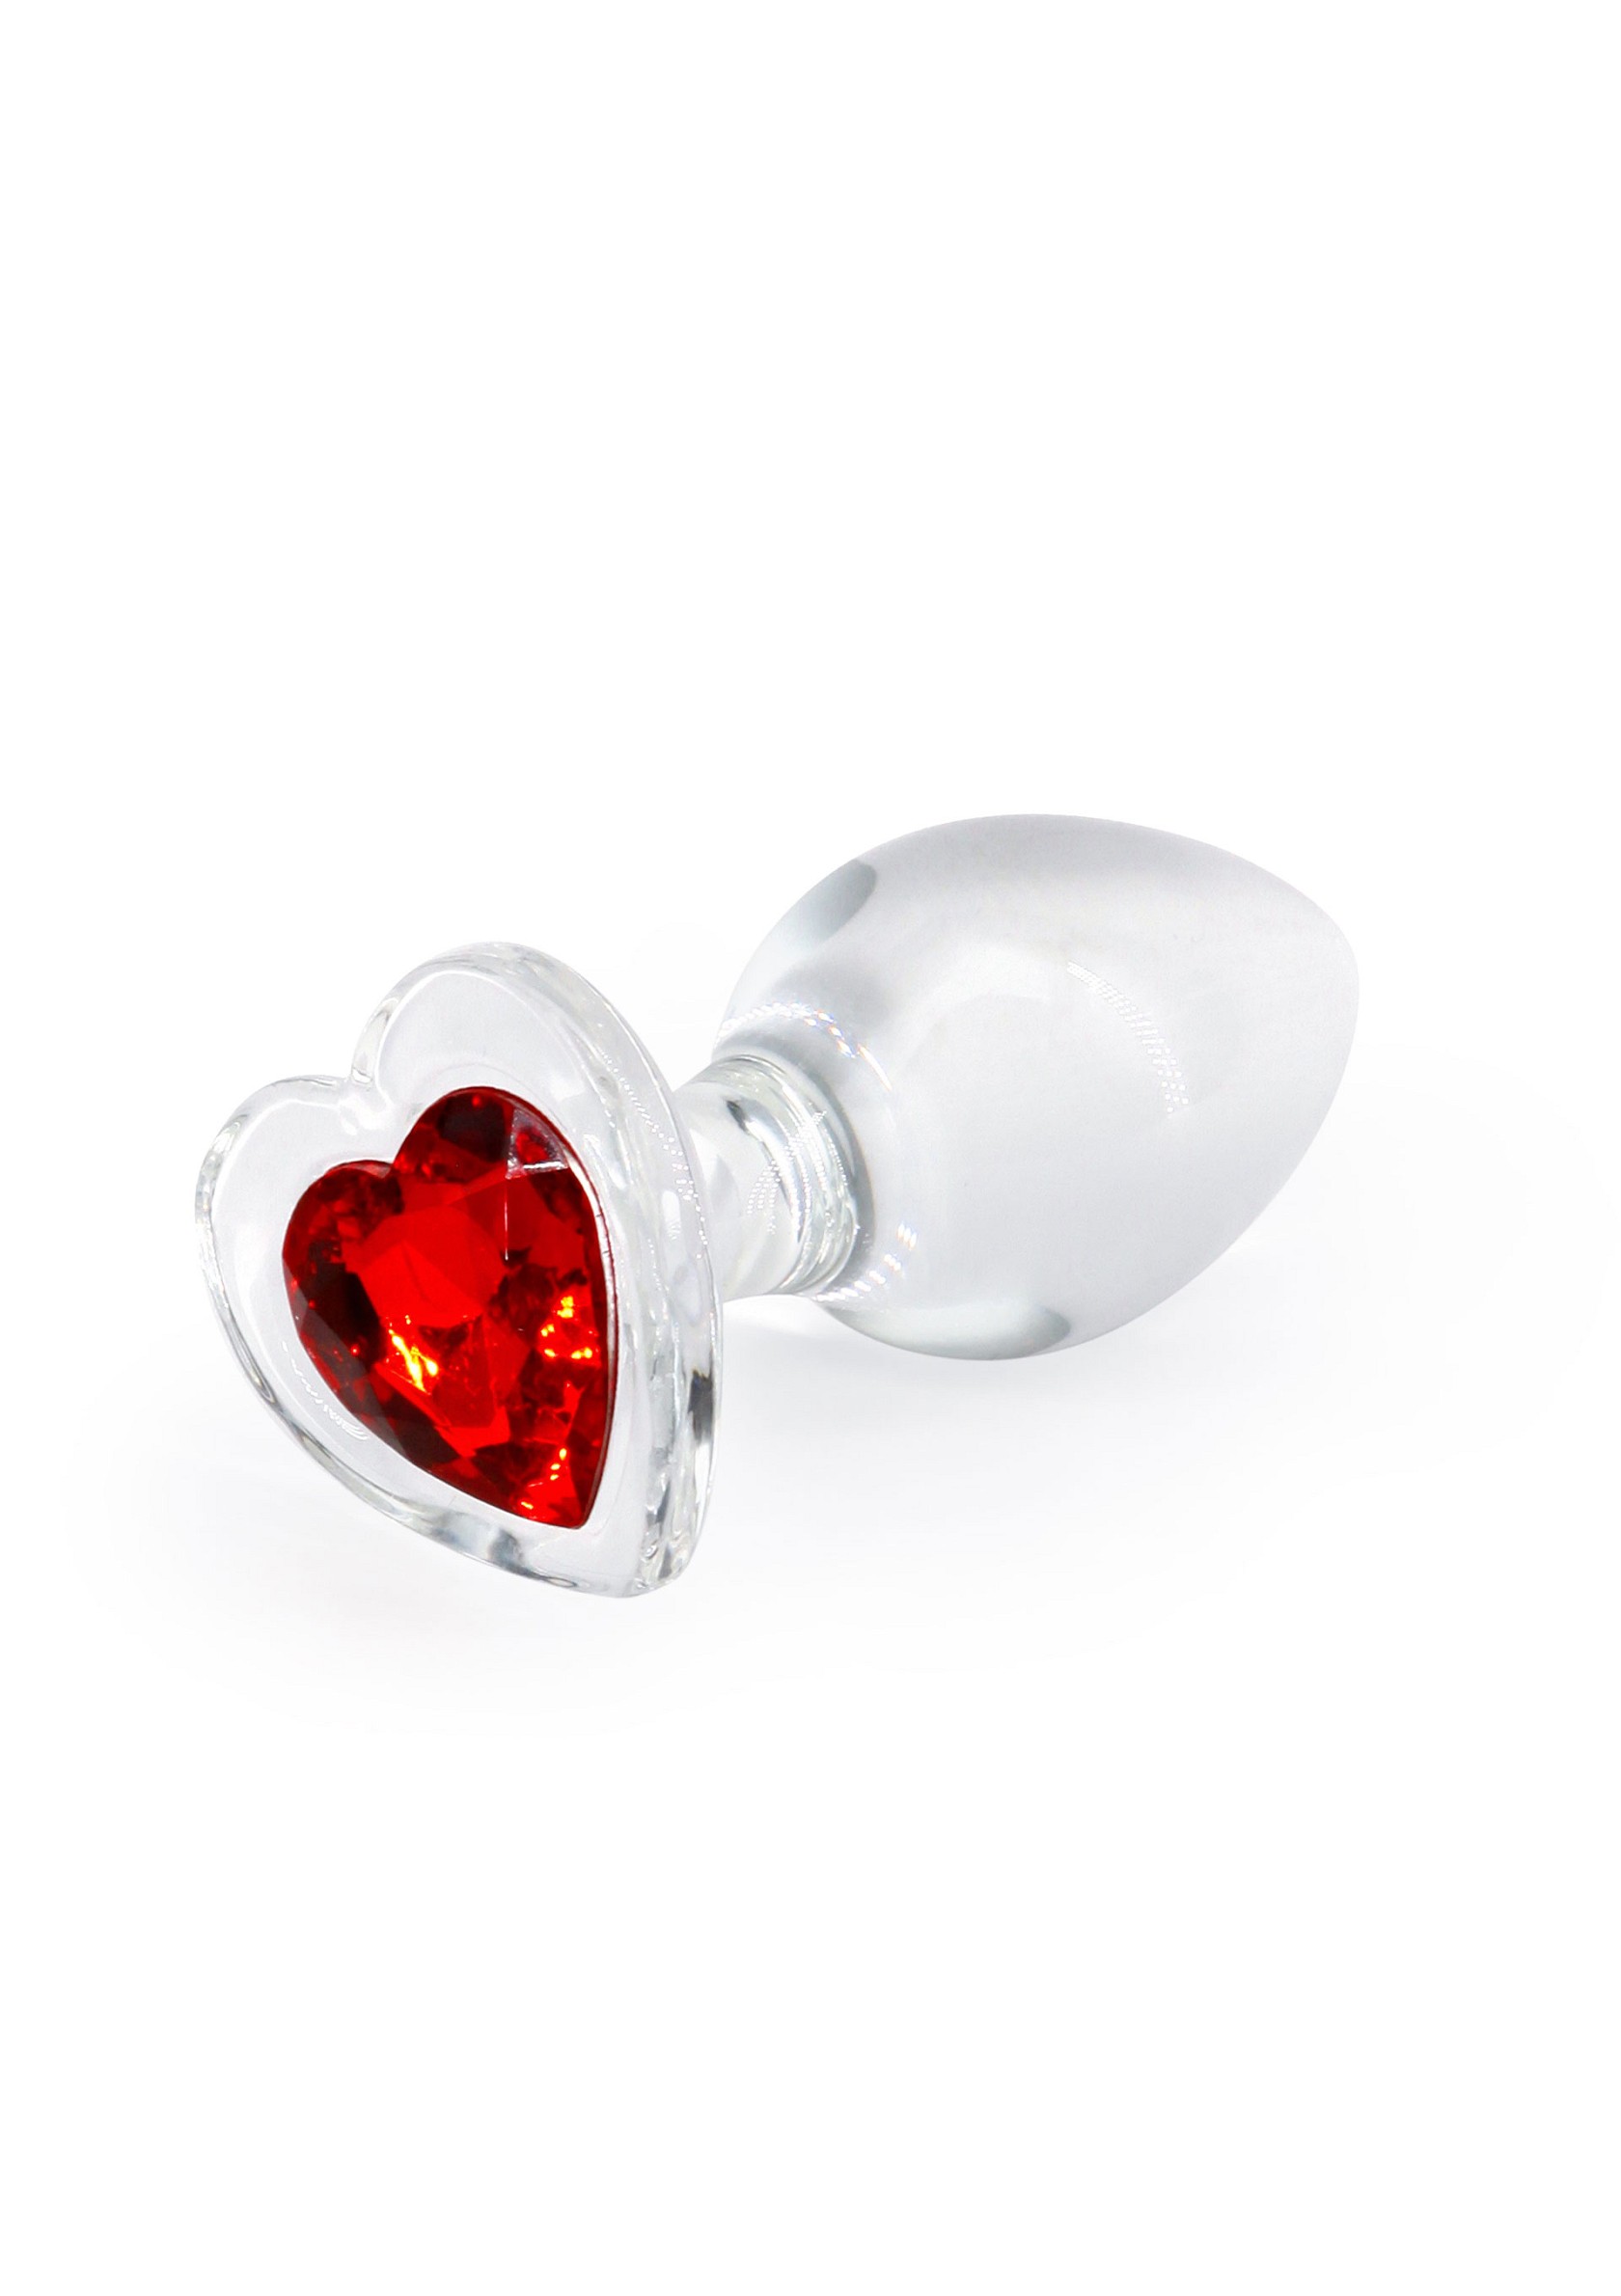 Crystal Desires Red Heart M